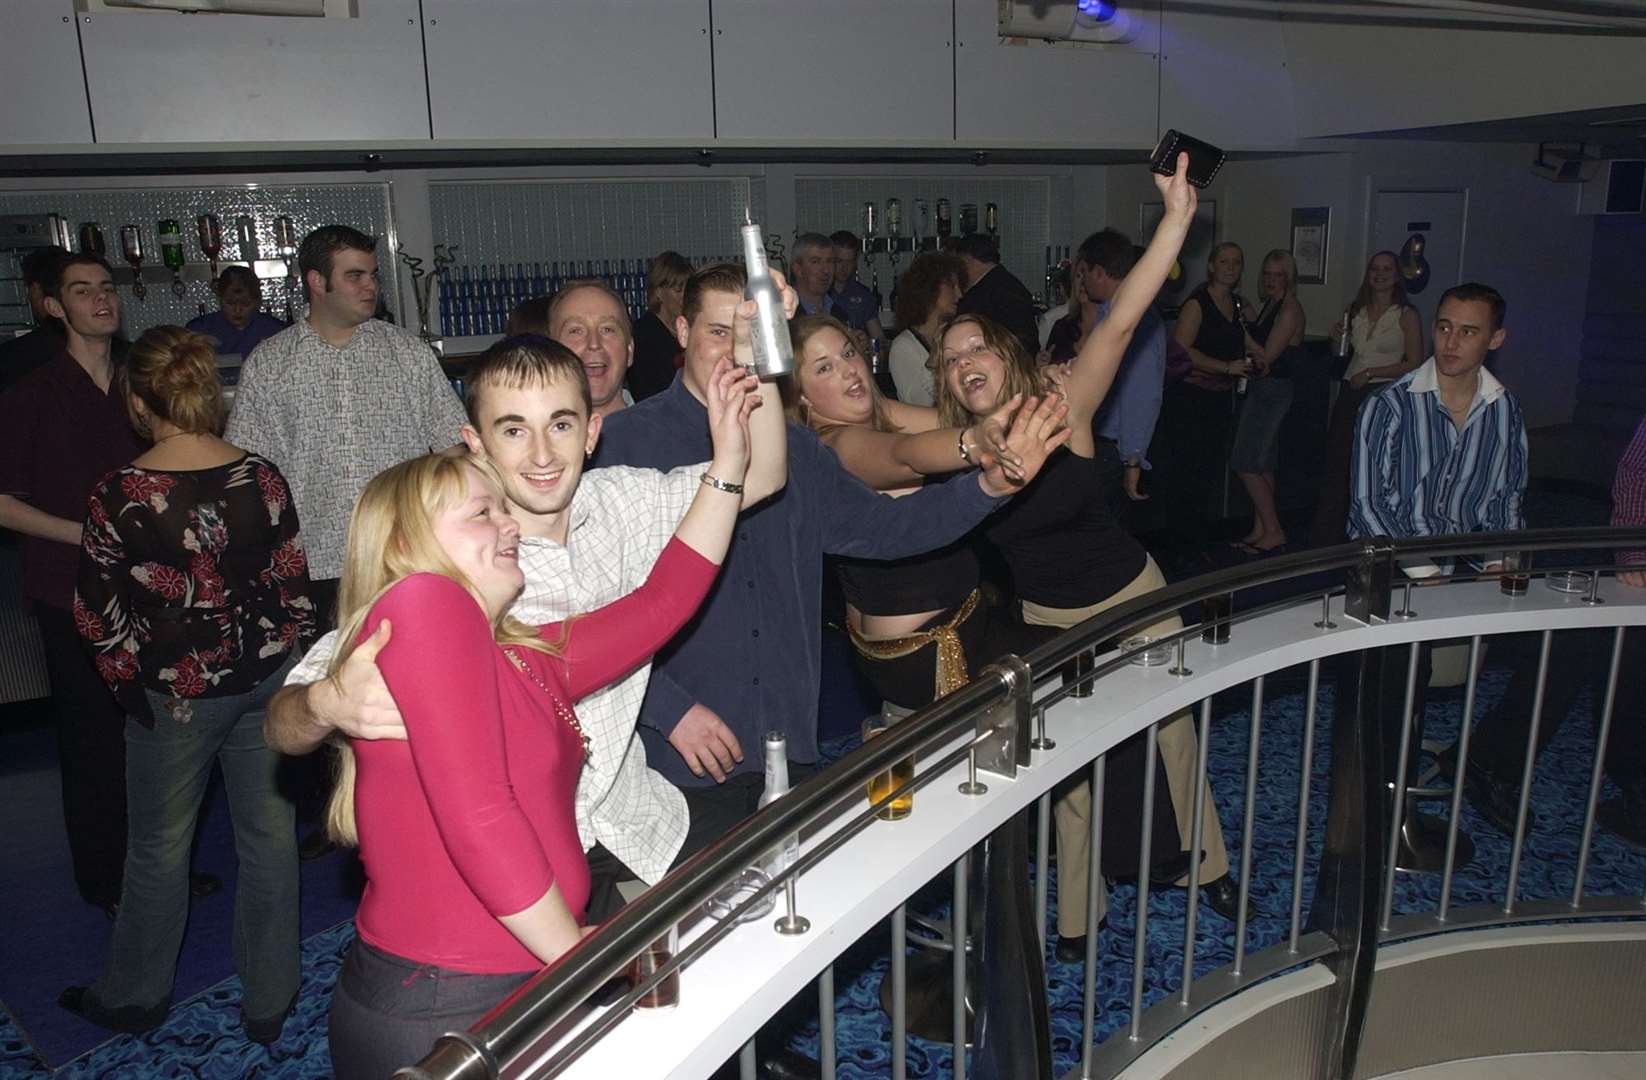 Revellers enjoying the first night in the new Liquid club in November 2002